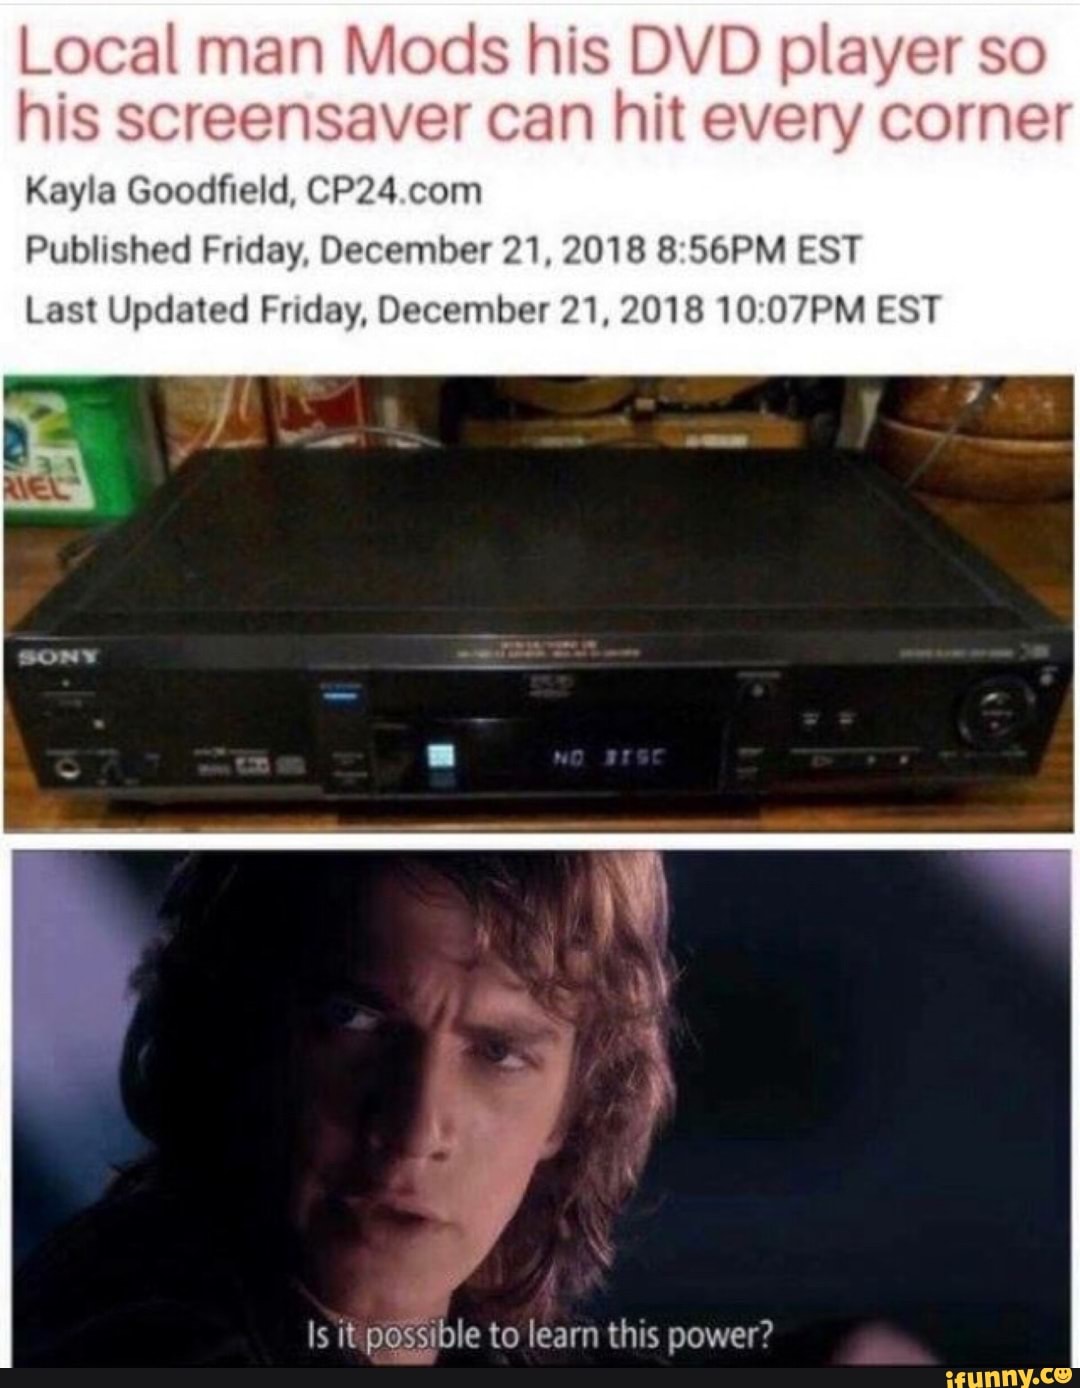 Local man Mods his DVD player so his screensaver can hit every